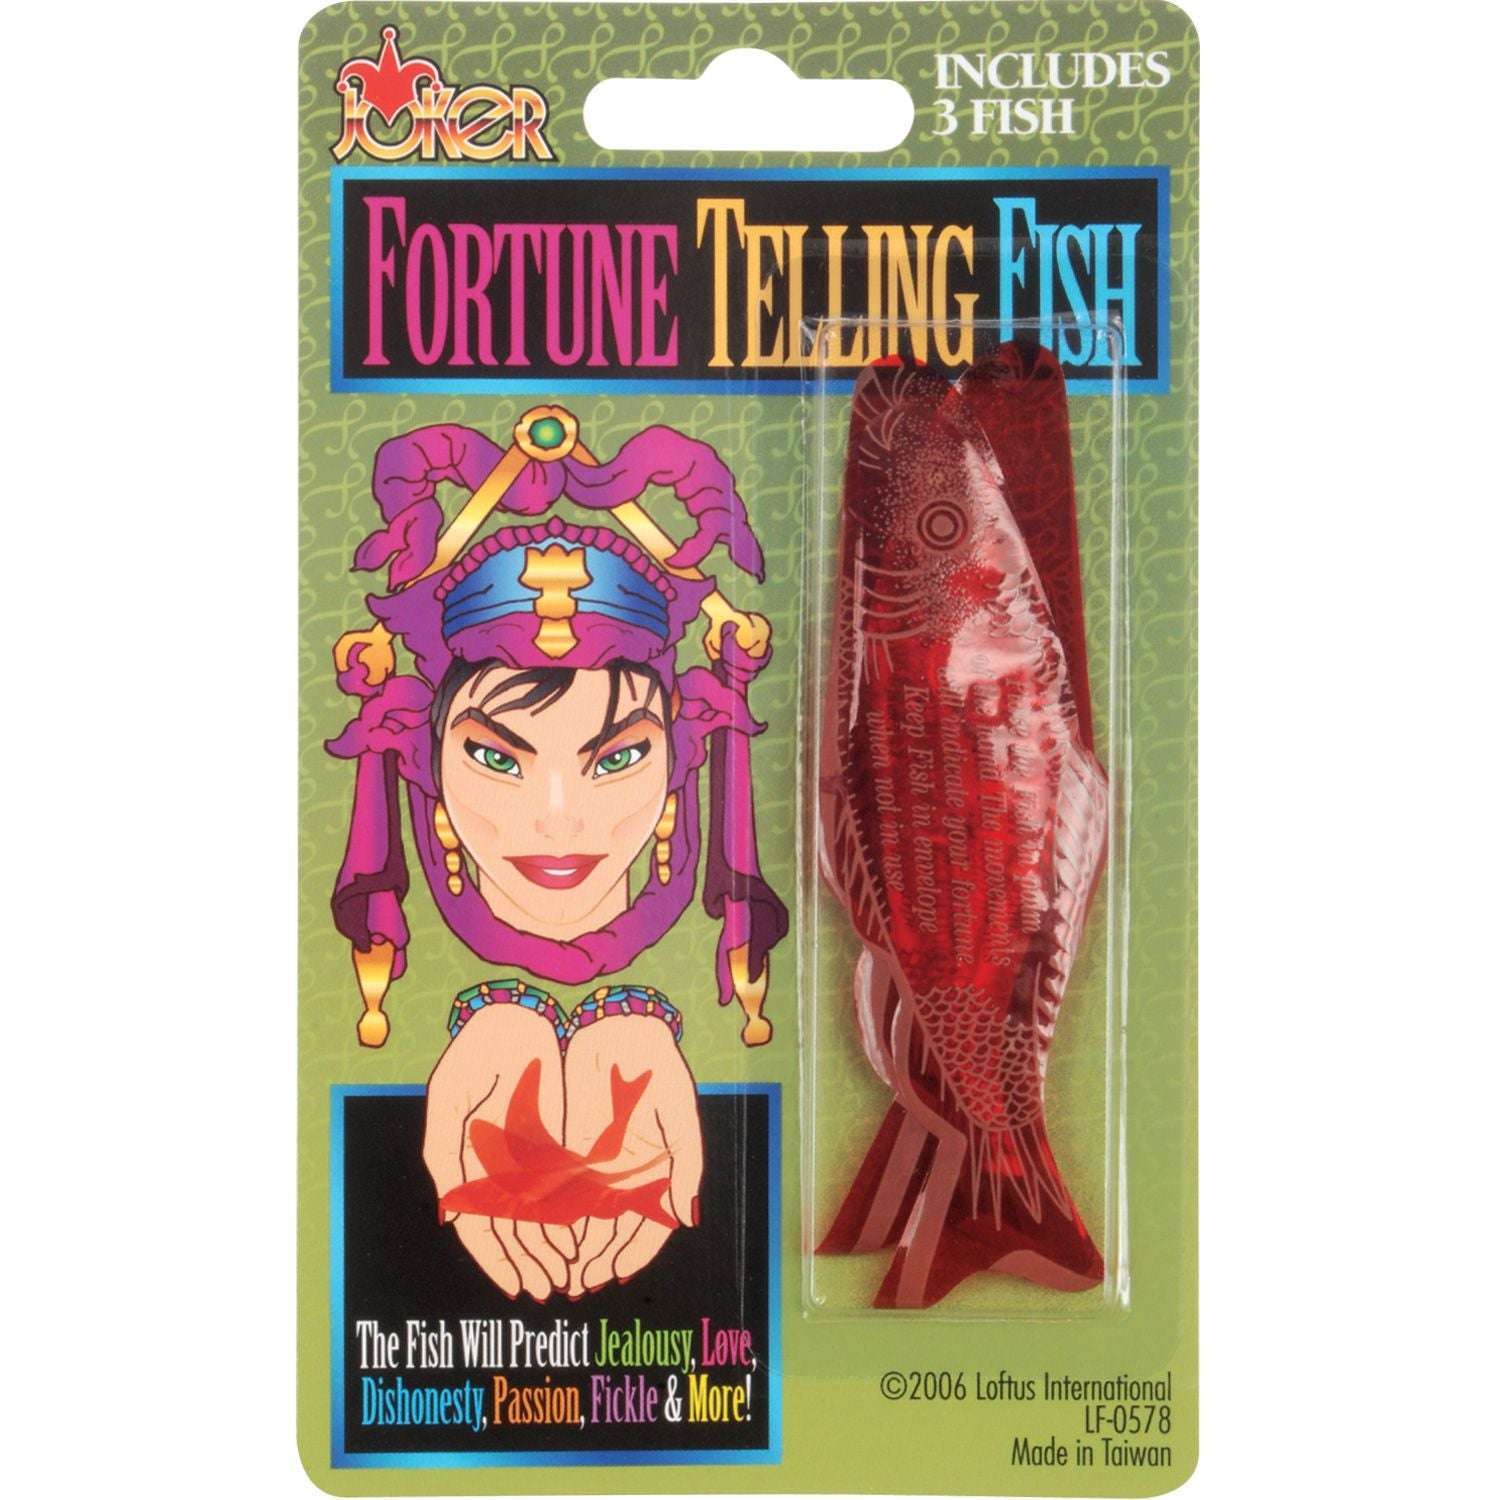 Miracle Fortune Telling Fish